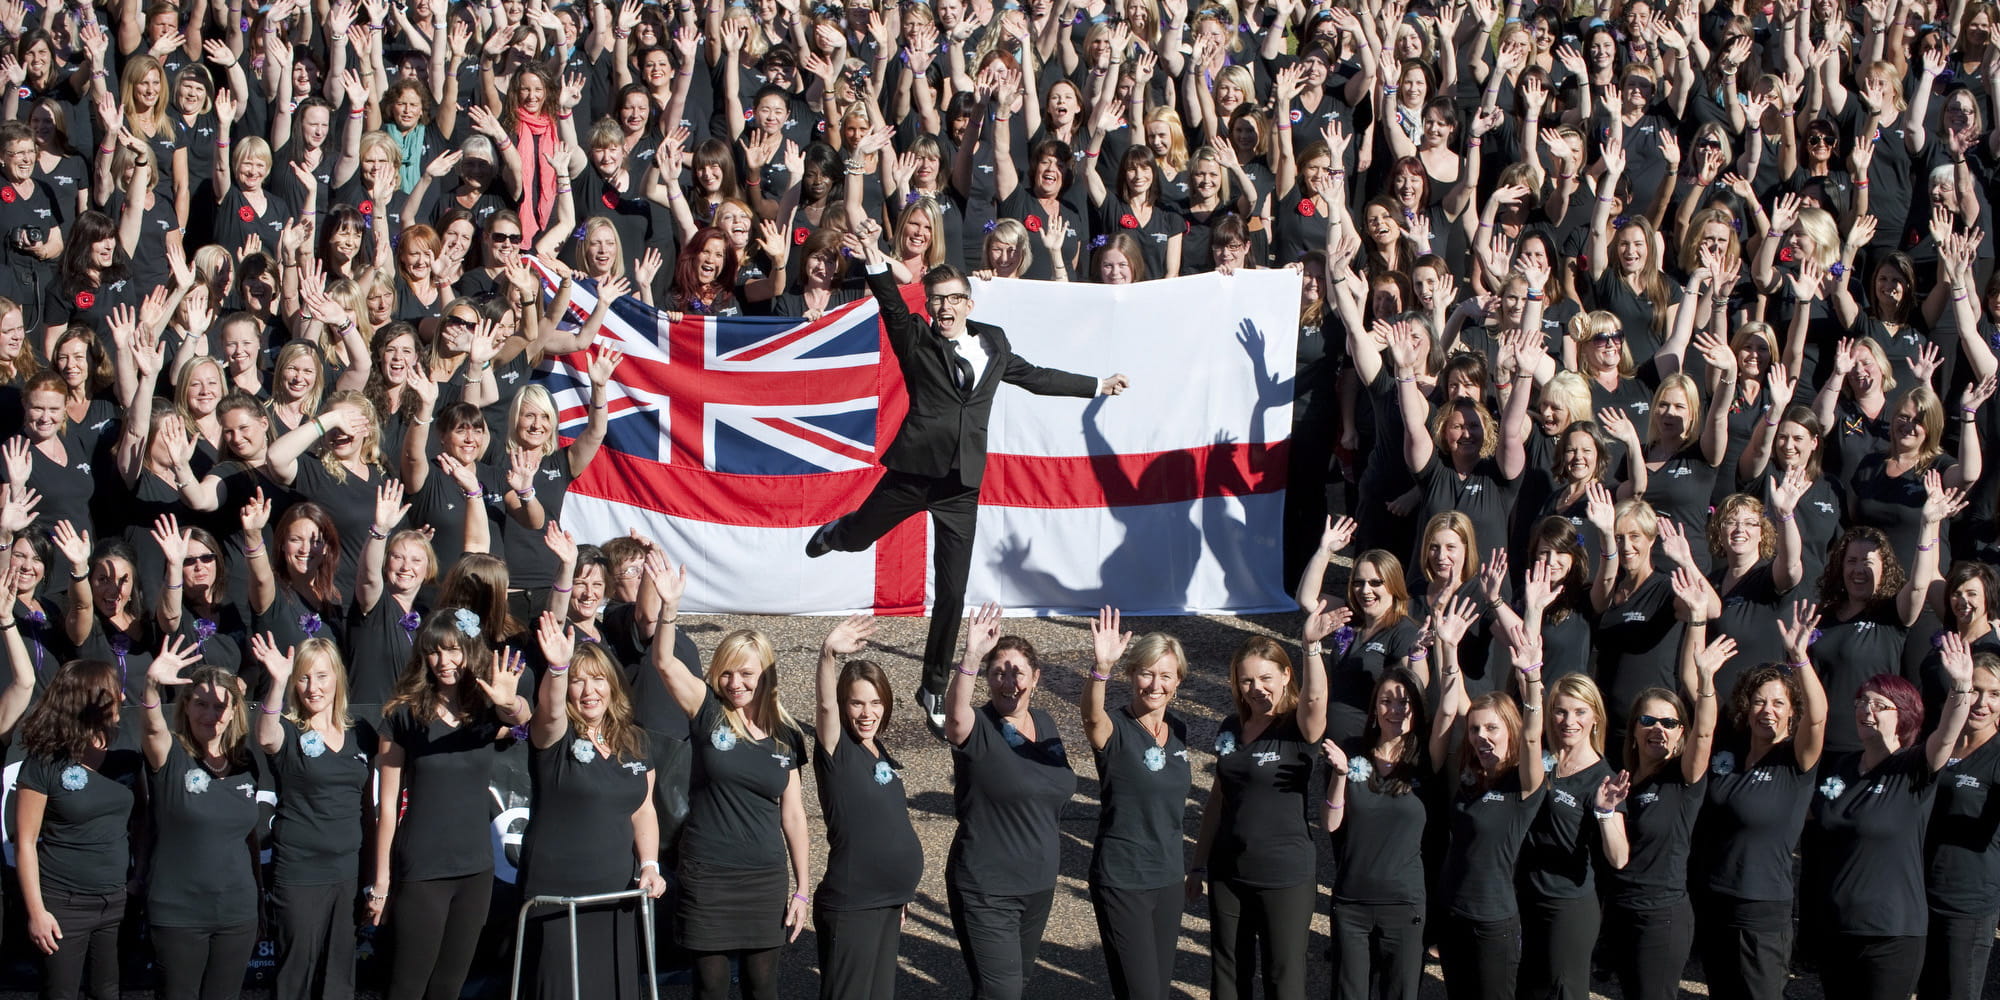 Gareth Malone surrounded by over 600 members of the military wives choir